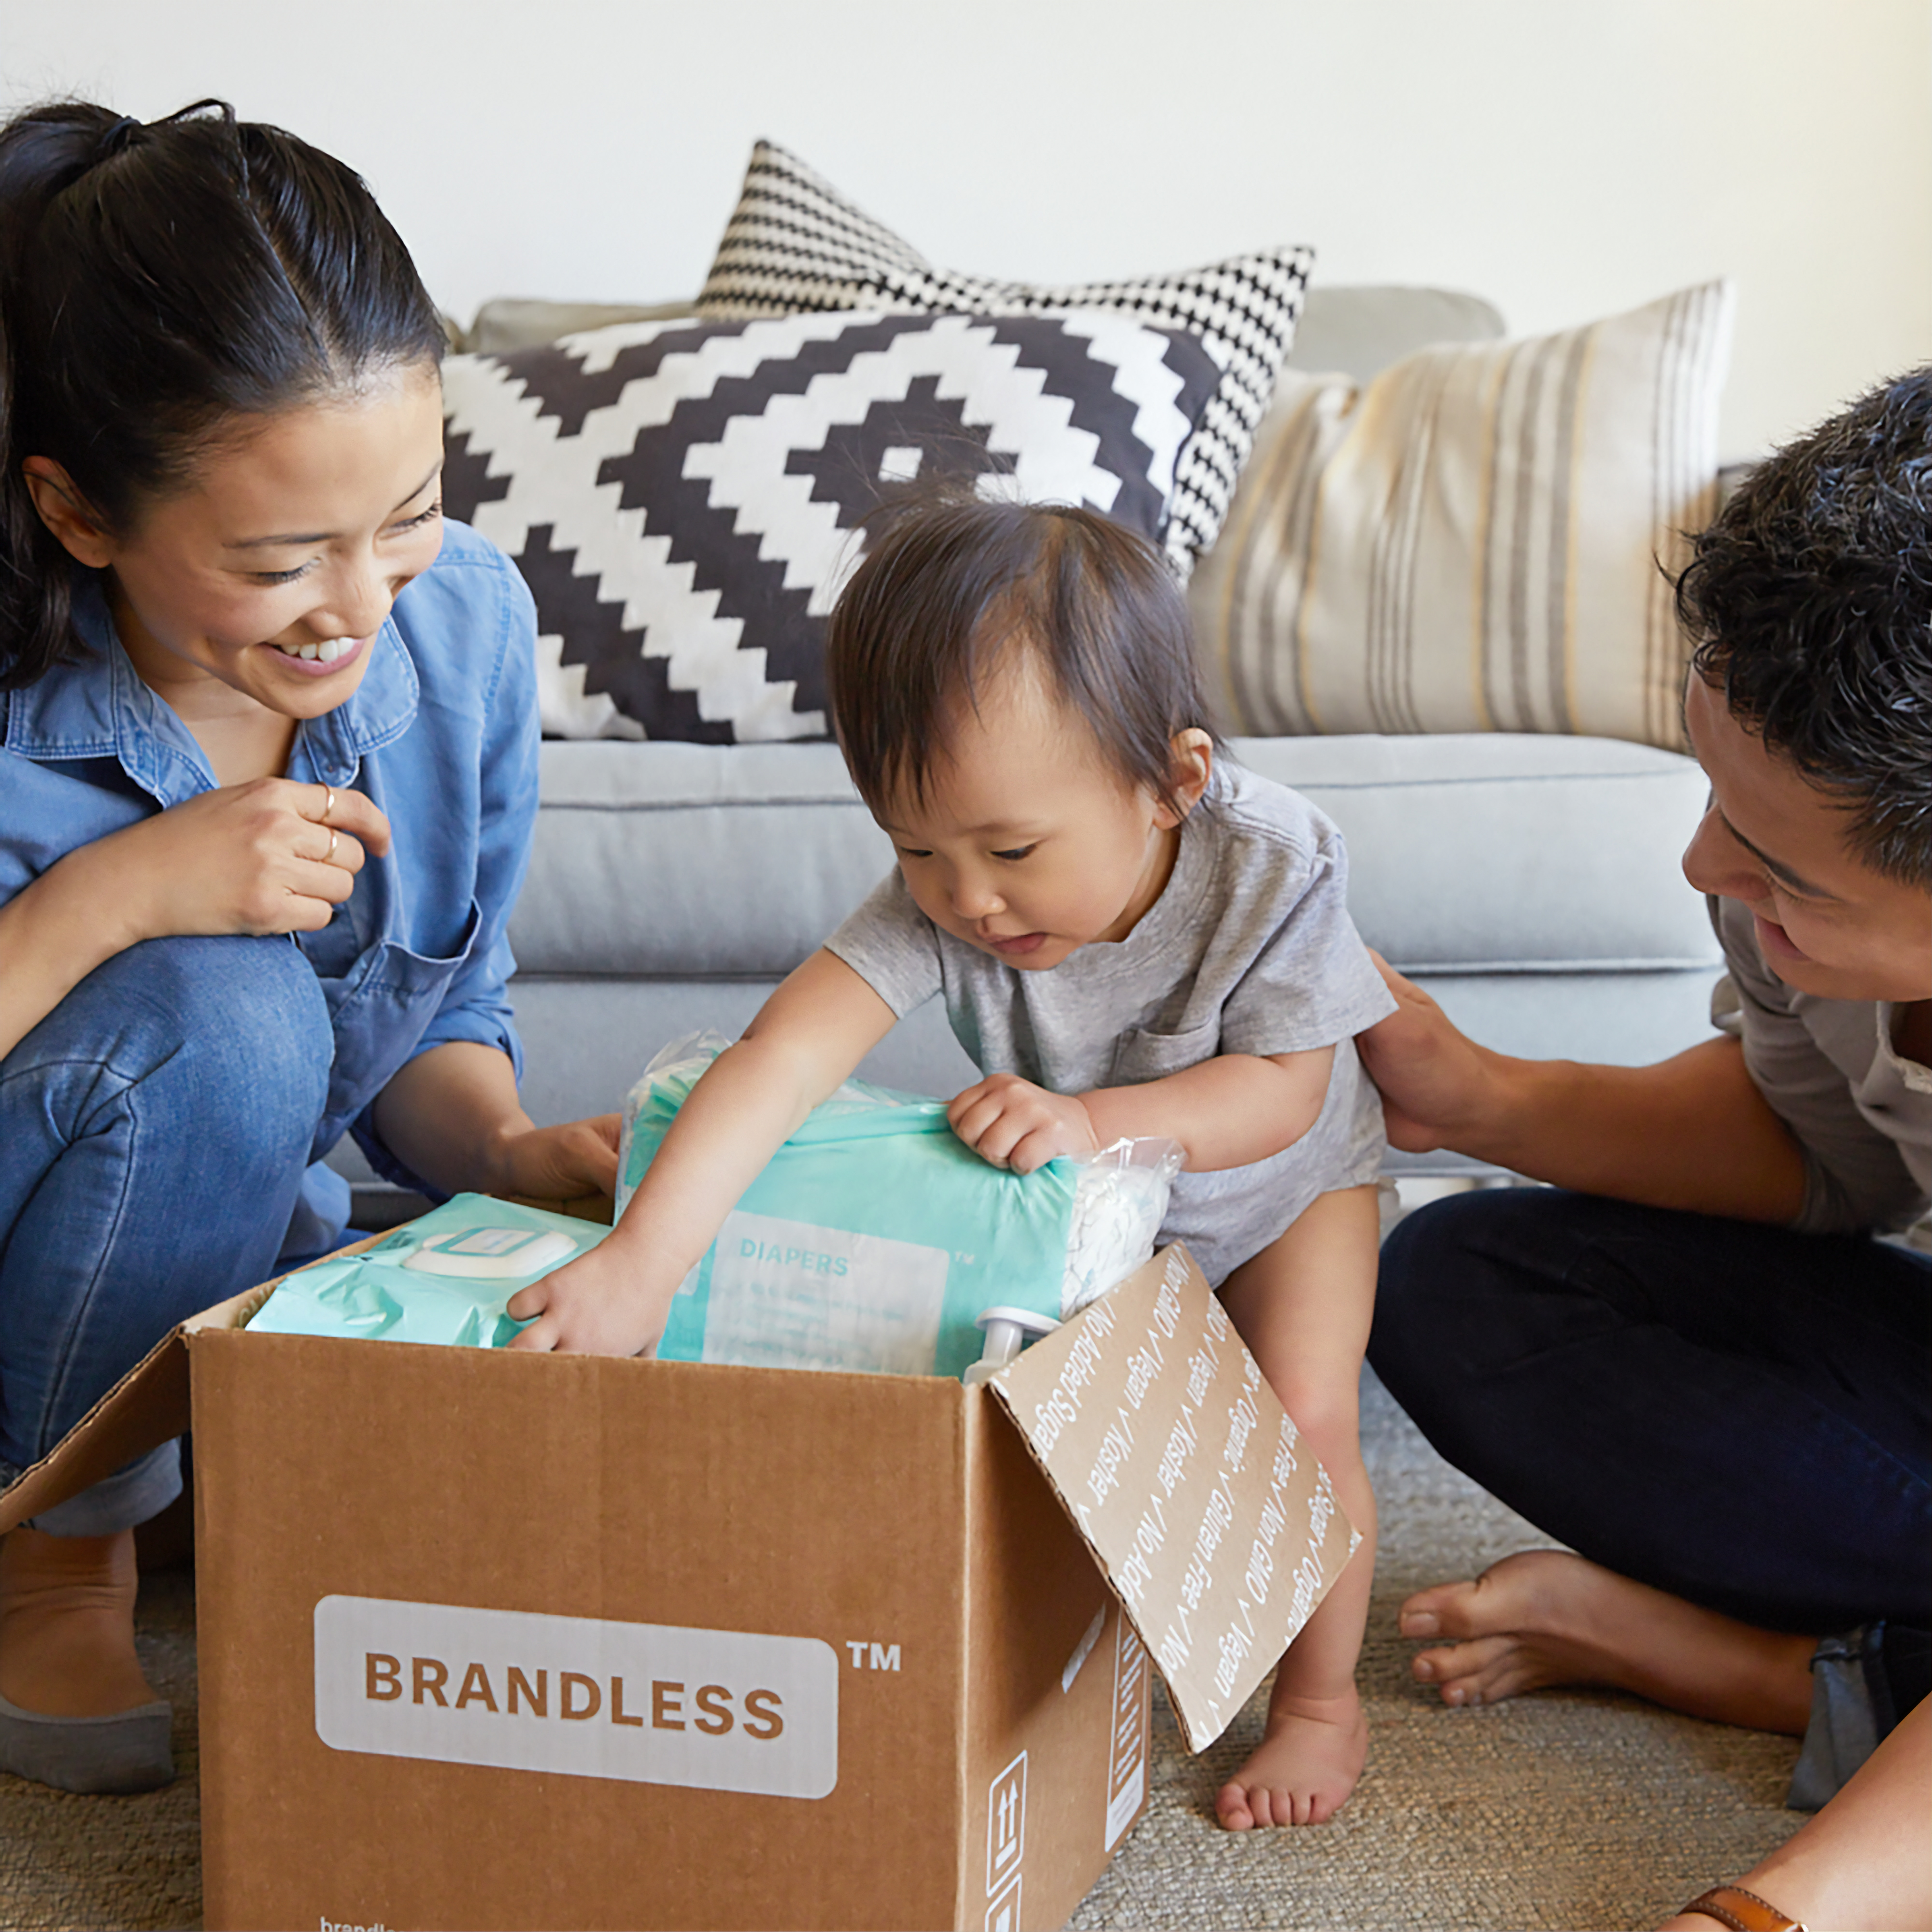 Moving up: Young family with baby opening a box